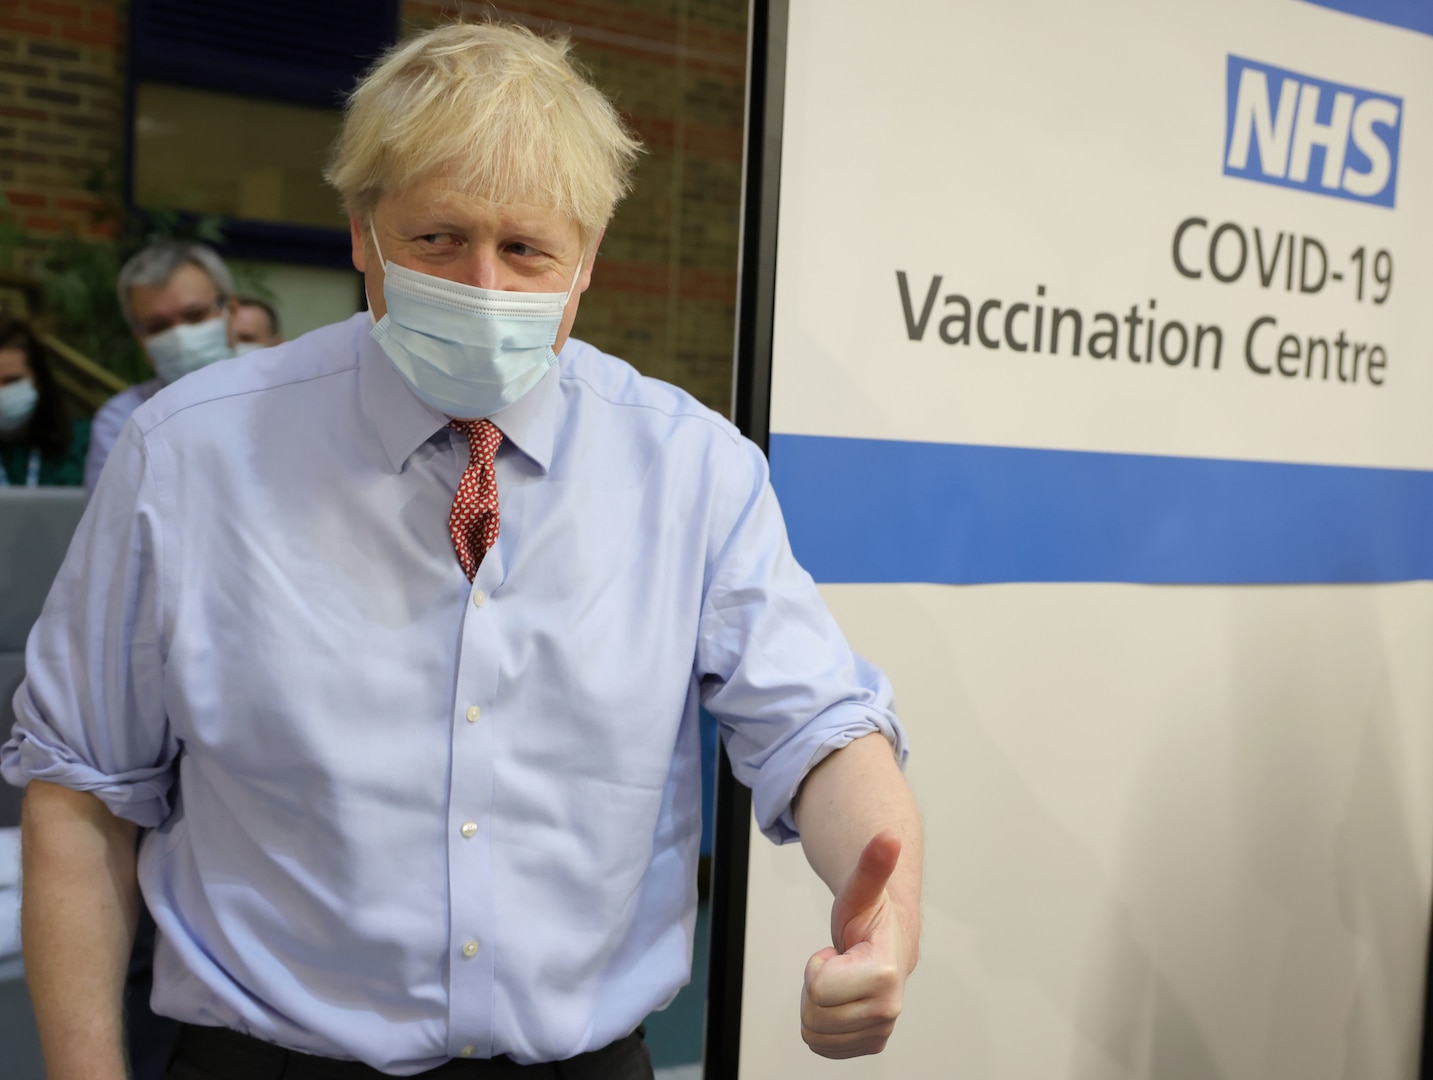 “Boris Johnson visits Covid-19 Vaccine Center.” (Image by Number 10, December 8, 2020)